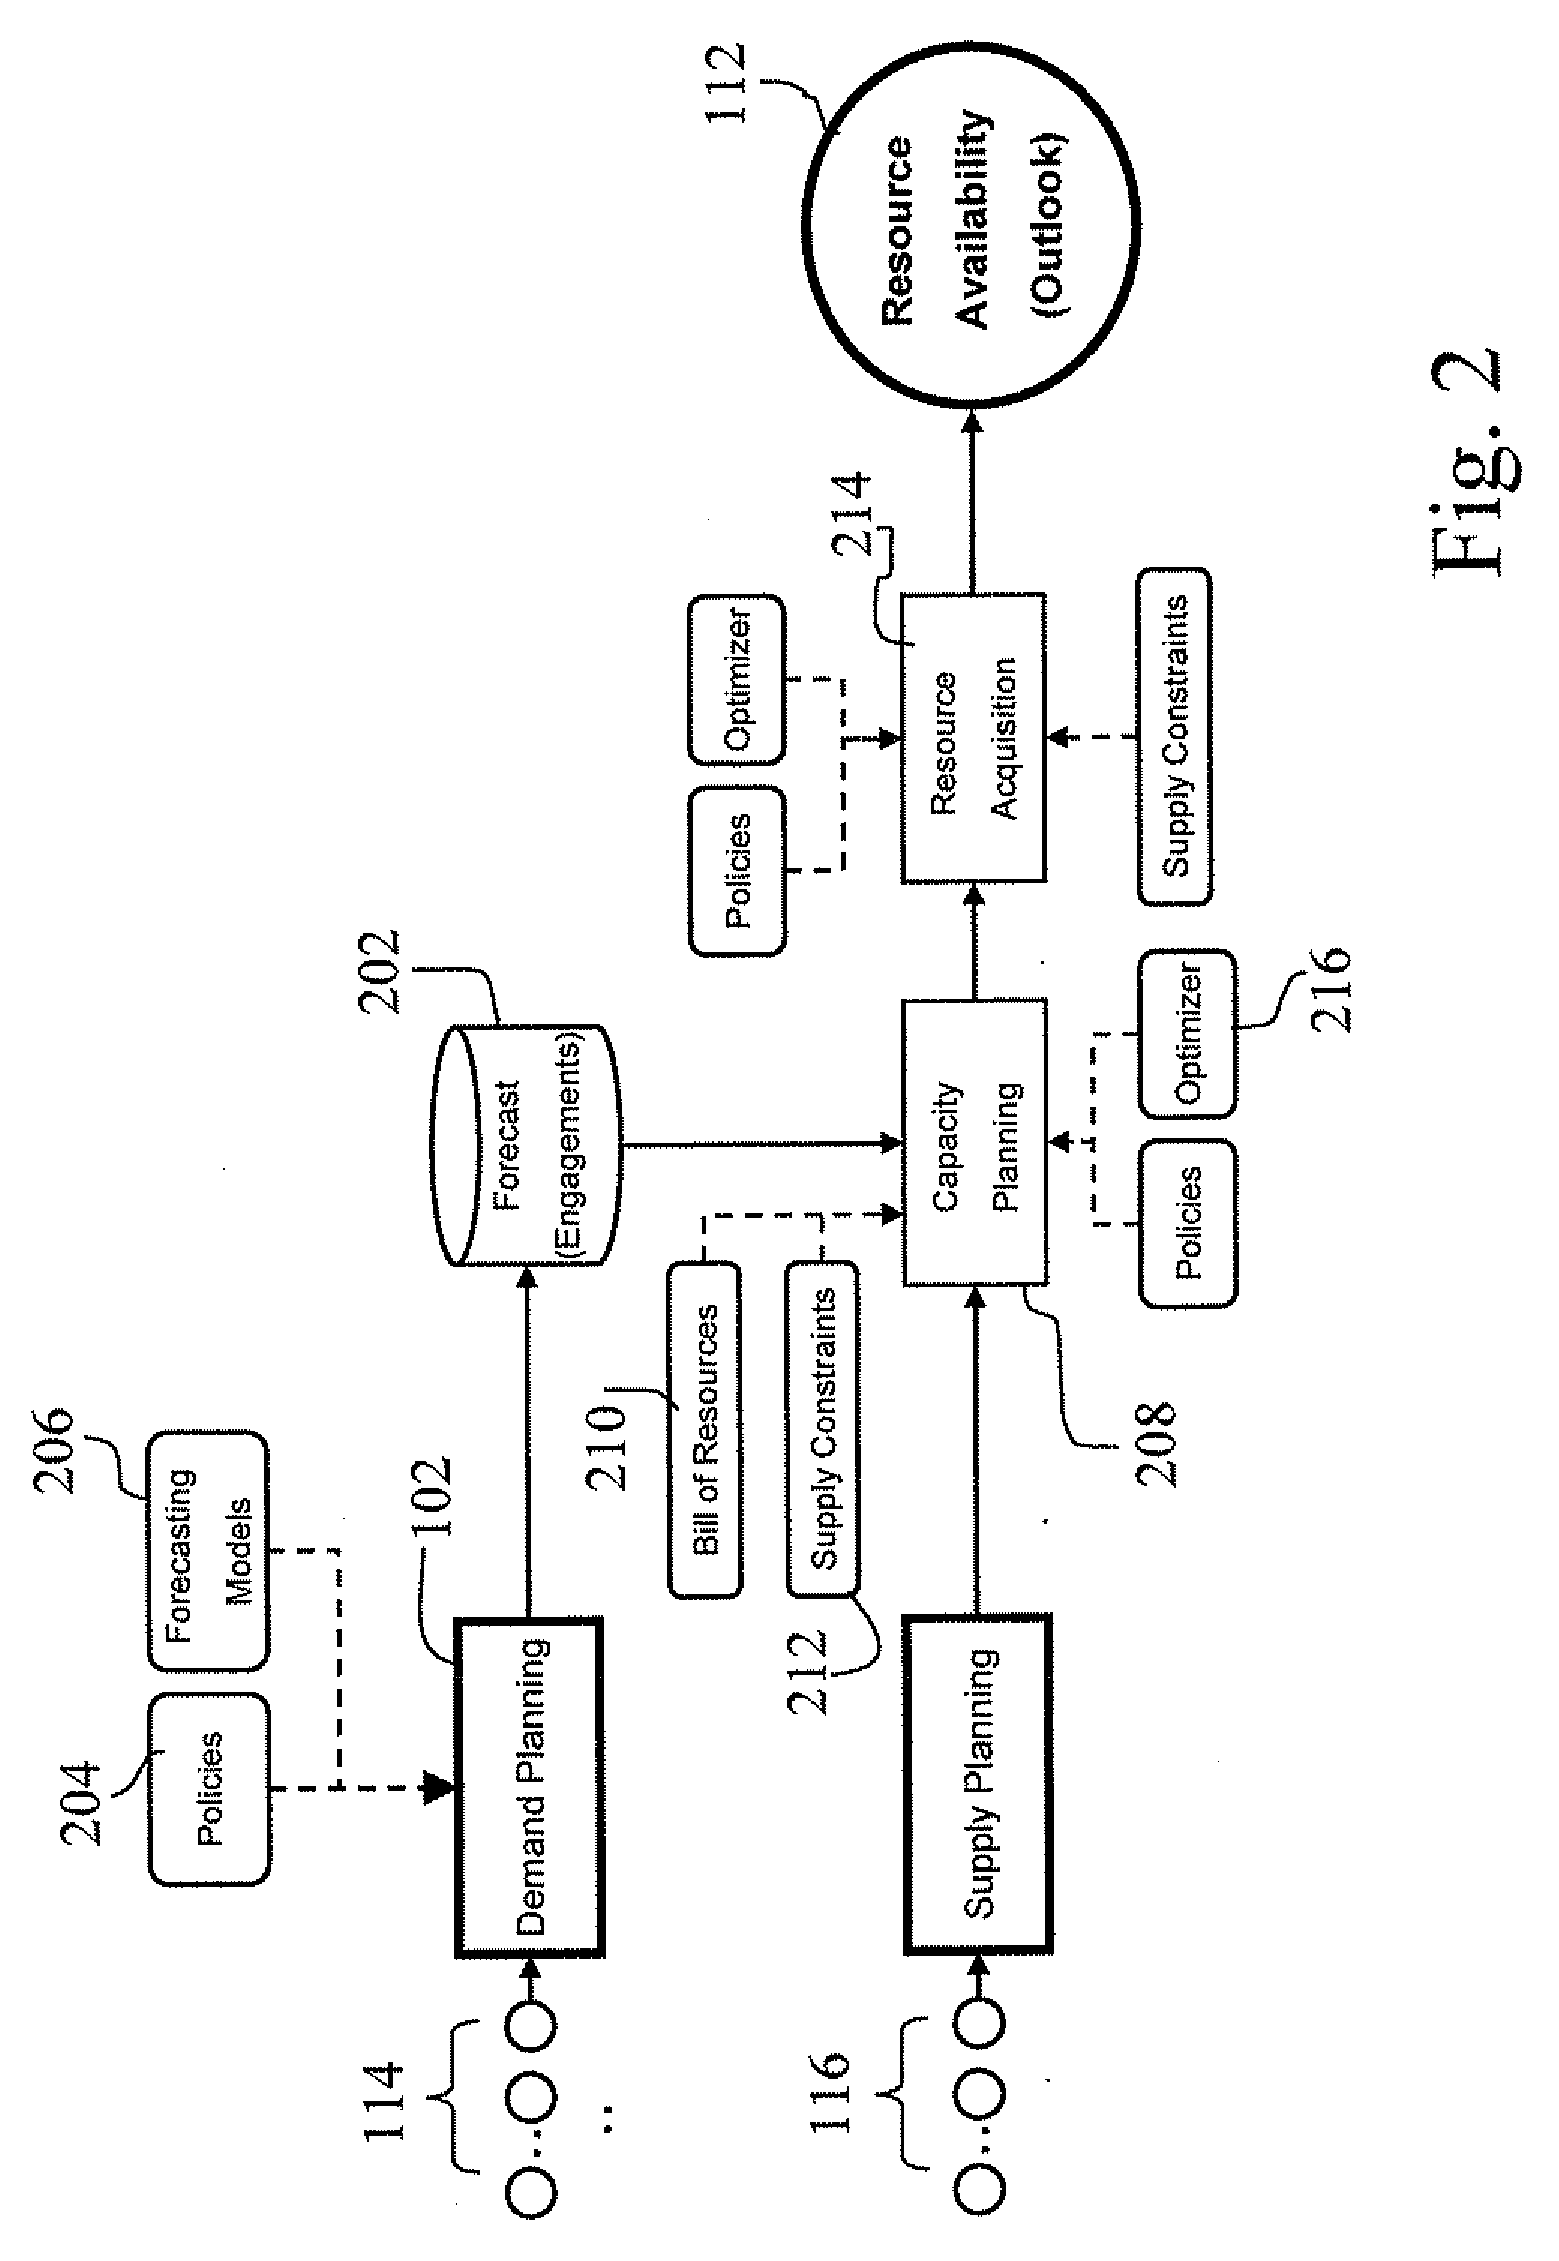 Method and system for estimating performance of resource-based service delivery operation by simulating interactions of multiple events